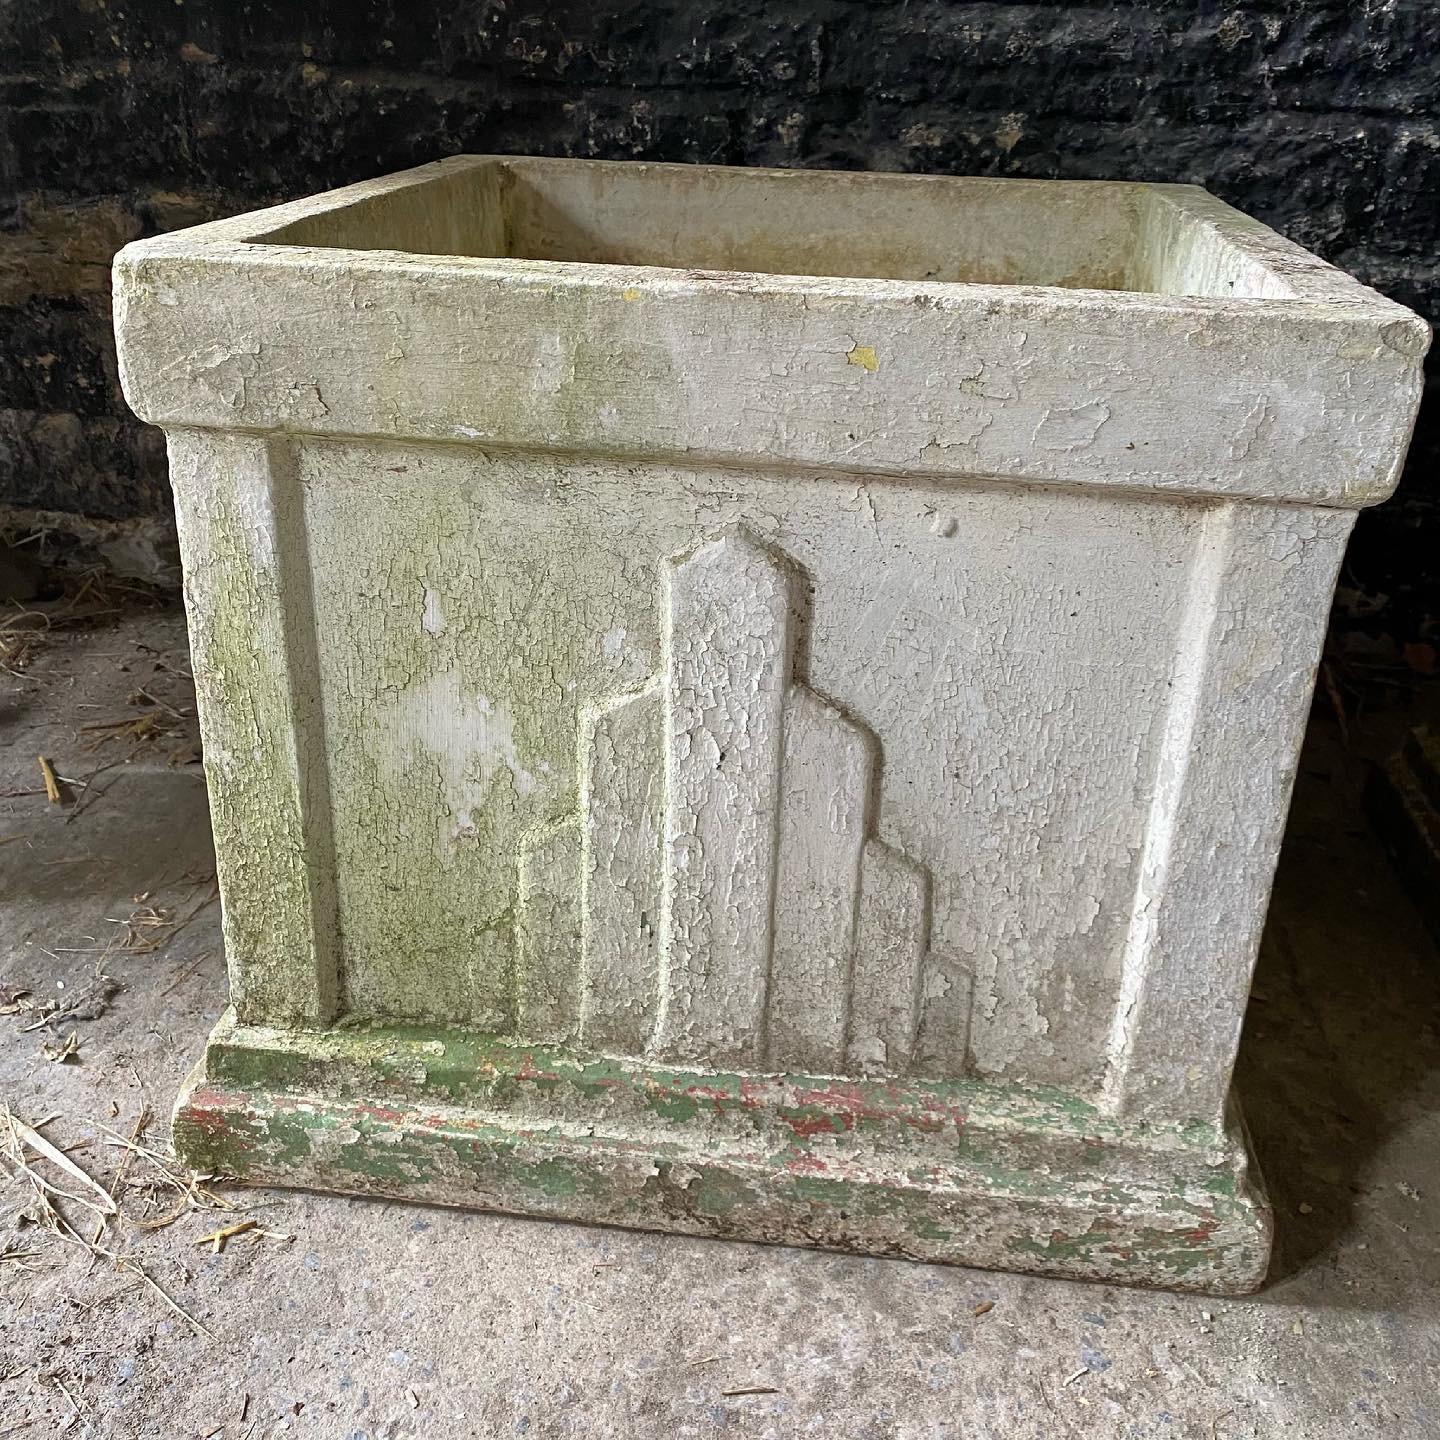 Pair of large French Art Deco composite cement stone geometric garden planters of square form, circa early 20th century. Pale flaky paint whitewash surface. 

These were sourced in the South of France, the sides feature typical Art Deco fan